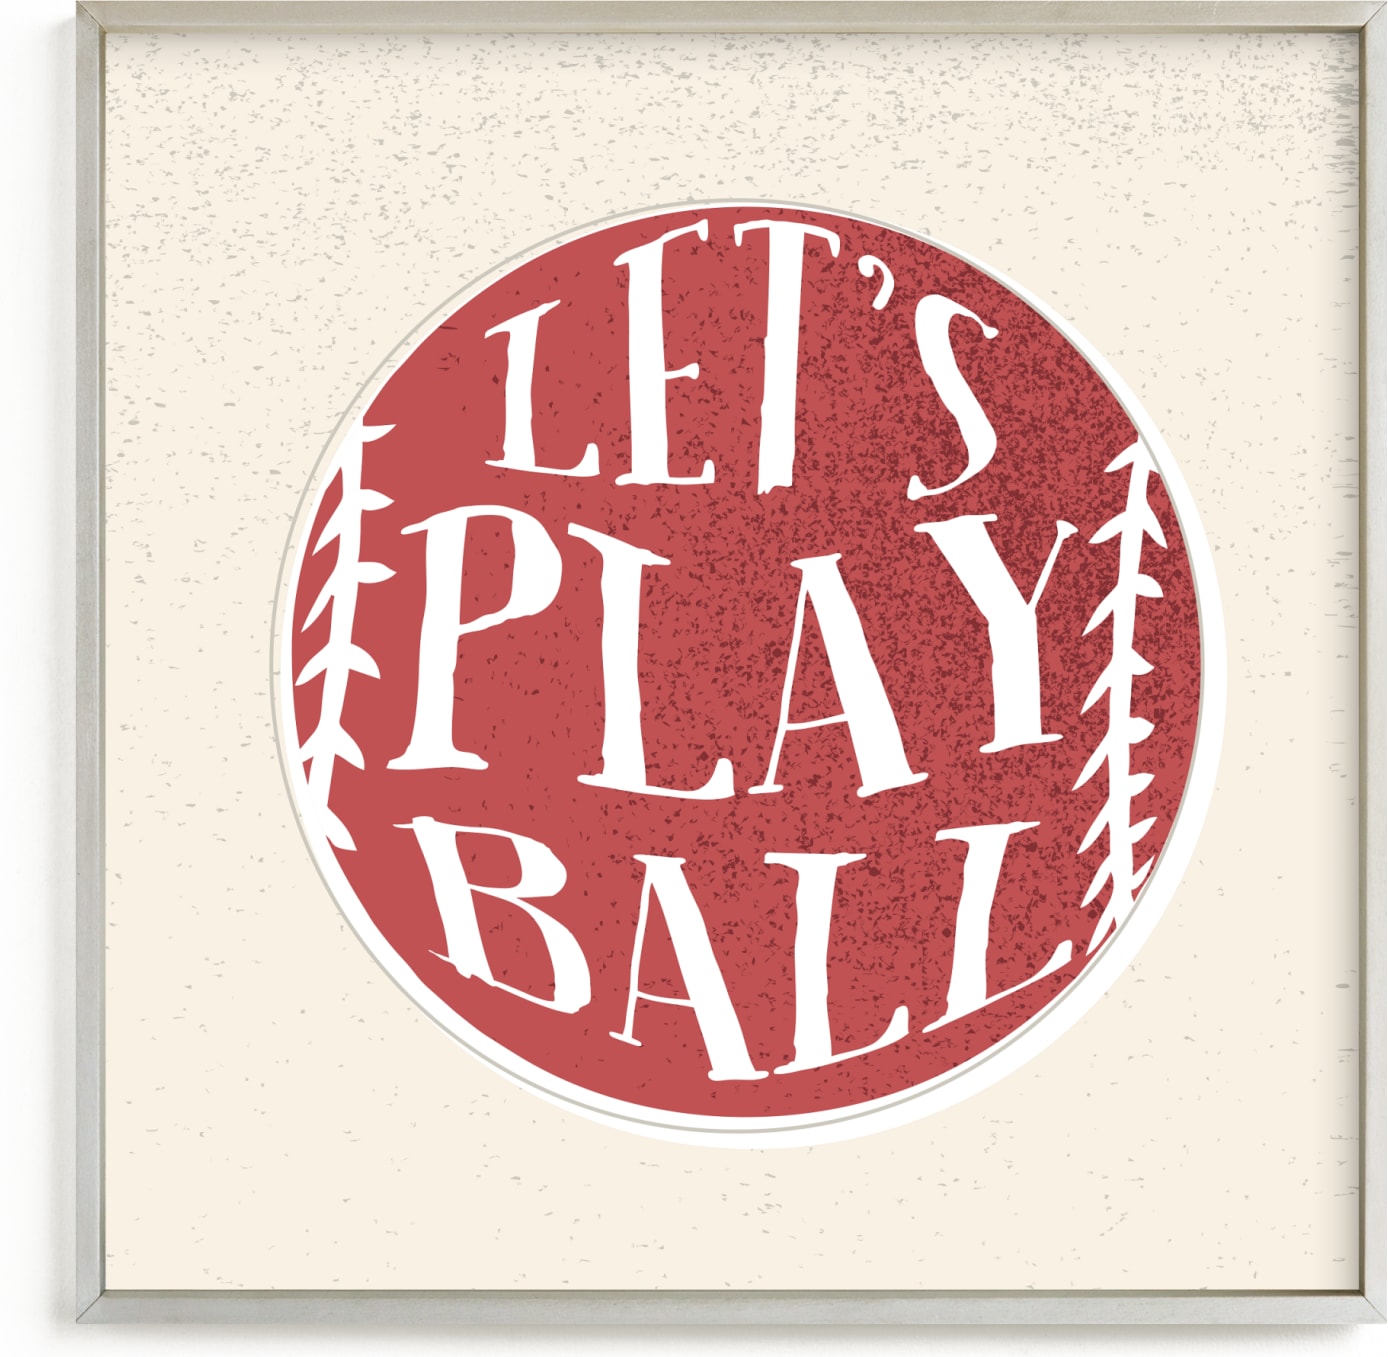 This is a beige art by Oma N. Ramkhelawan called Let's Play Ball!.